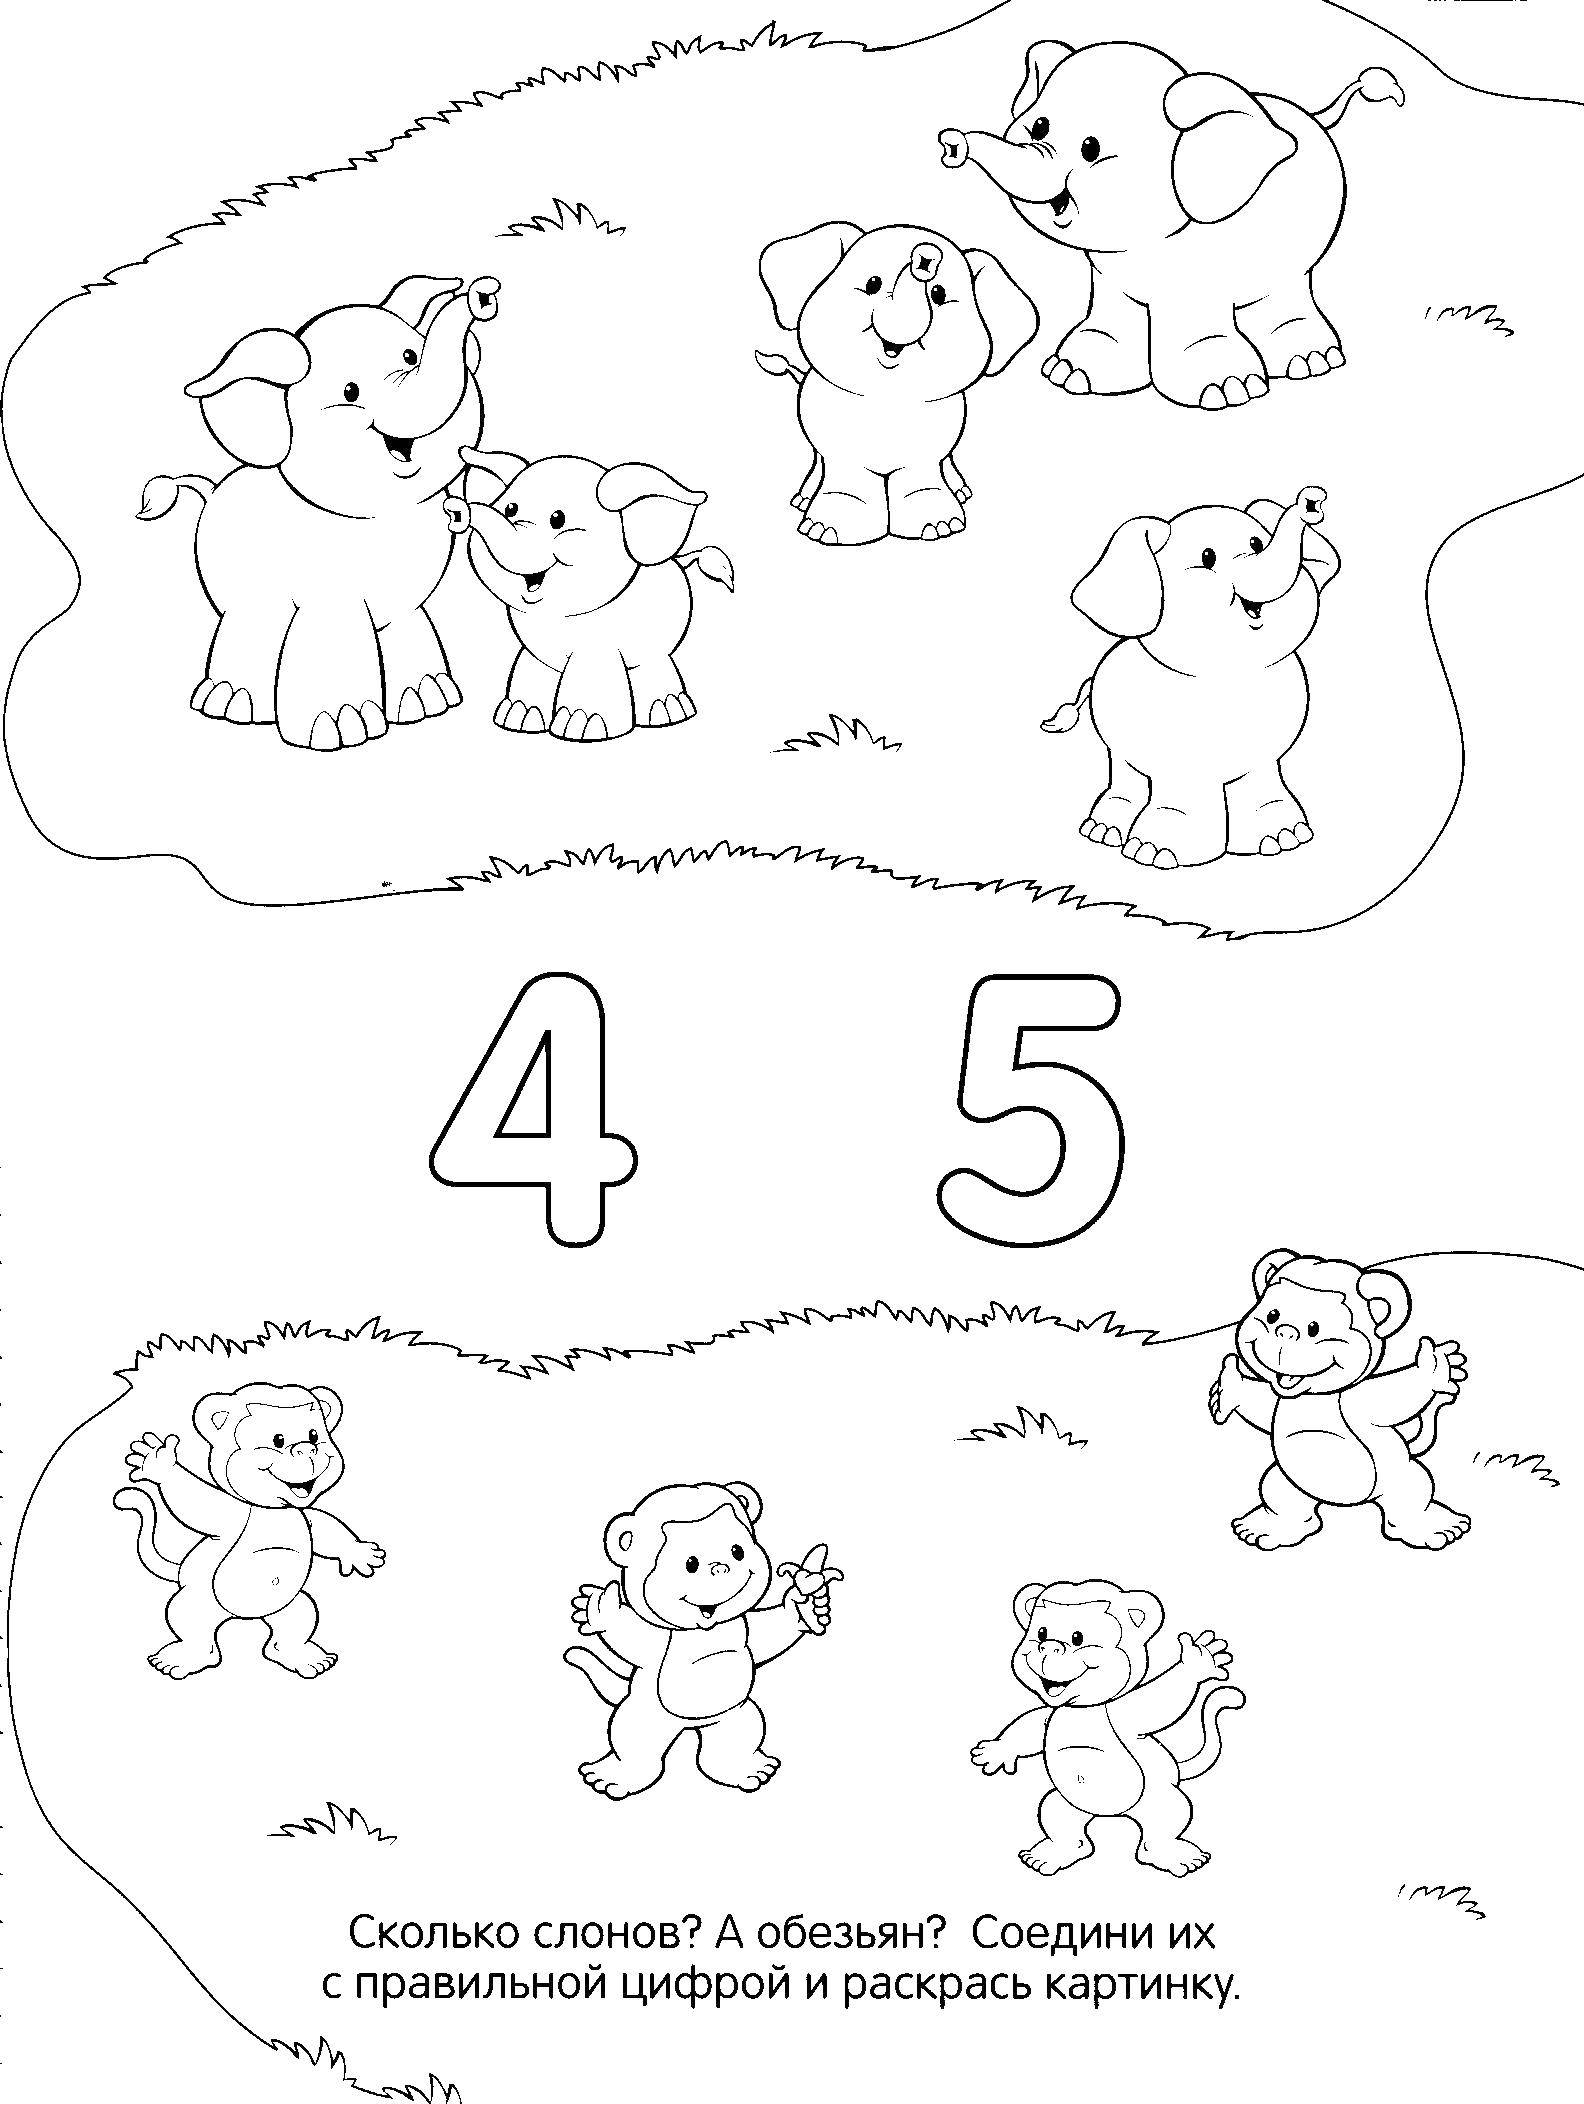 Coloring Count animals. Category on thinking. Tags:  on thinking, logic, problem, puzzle.